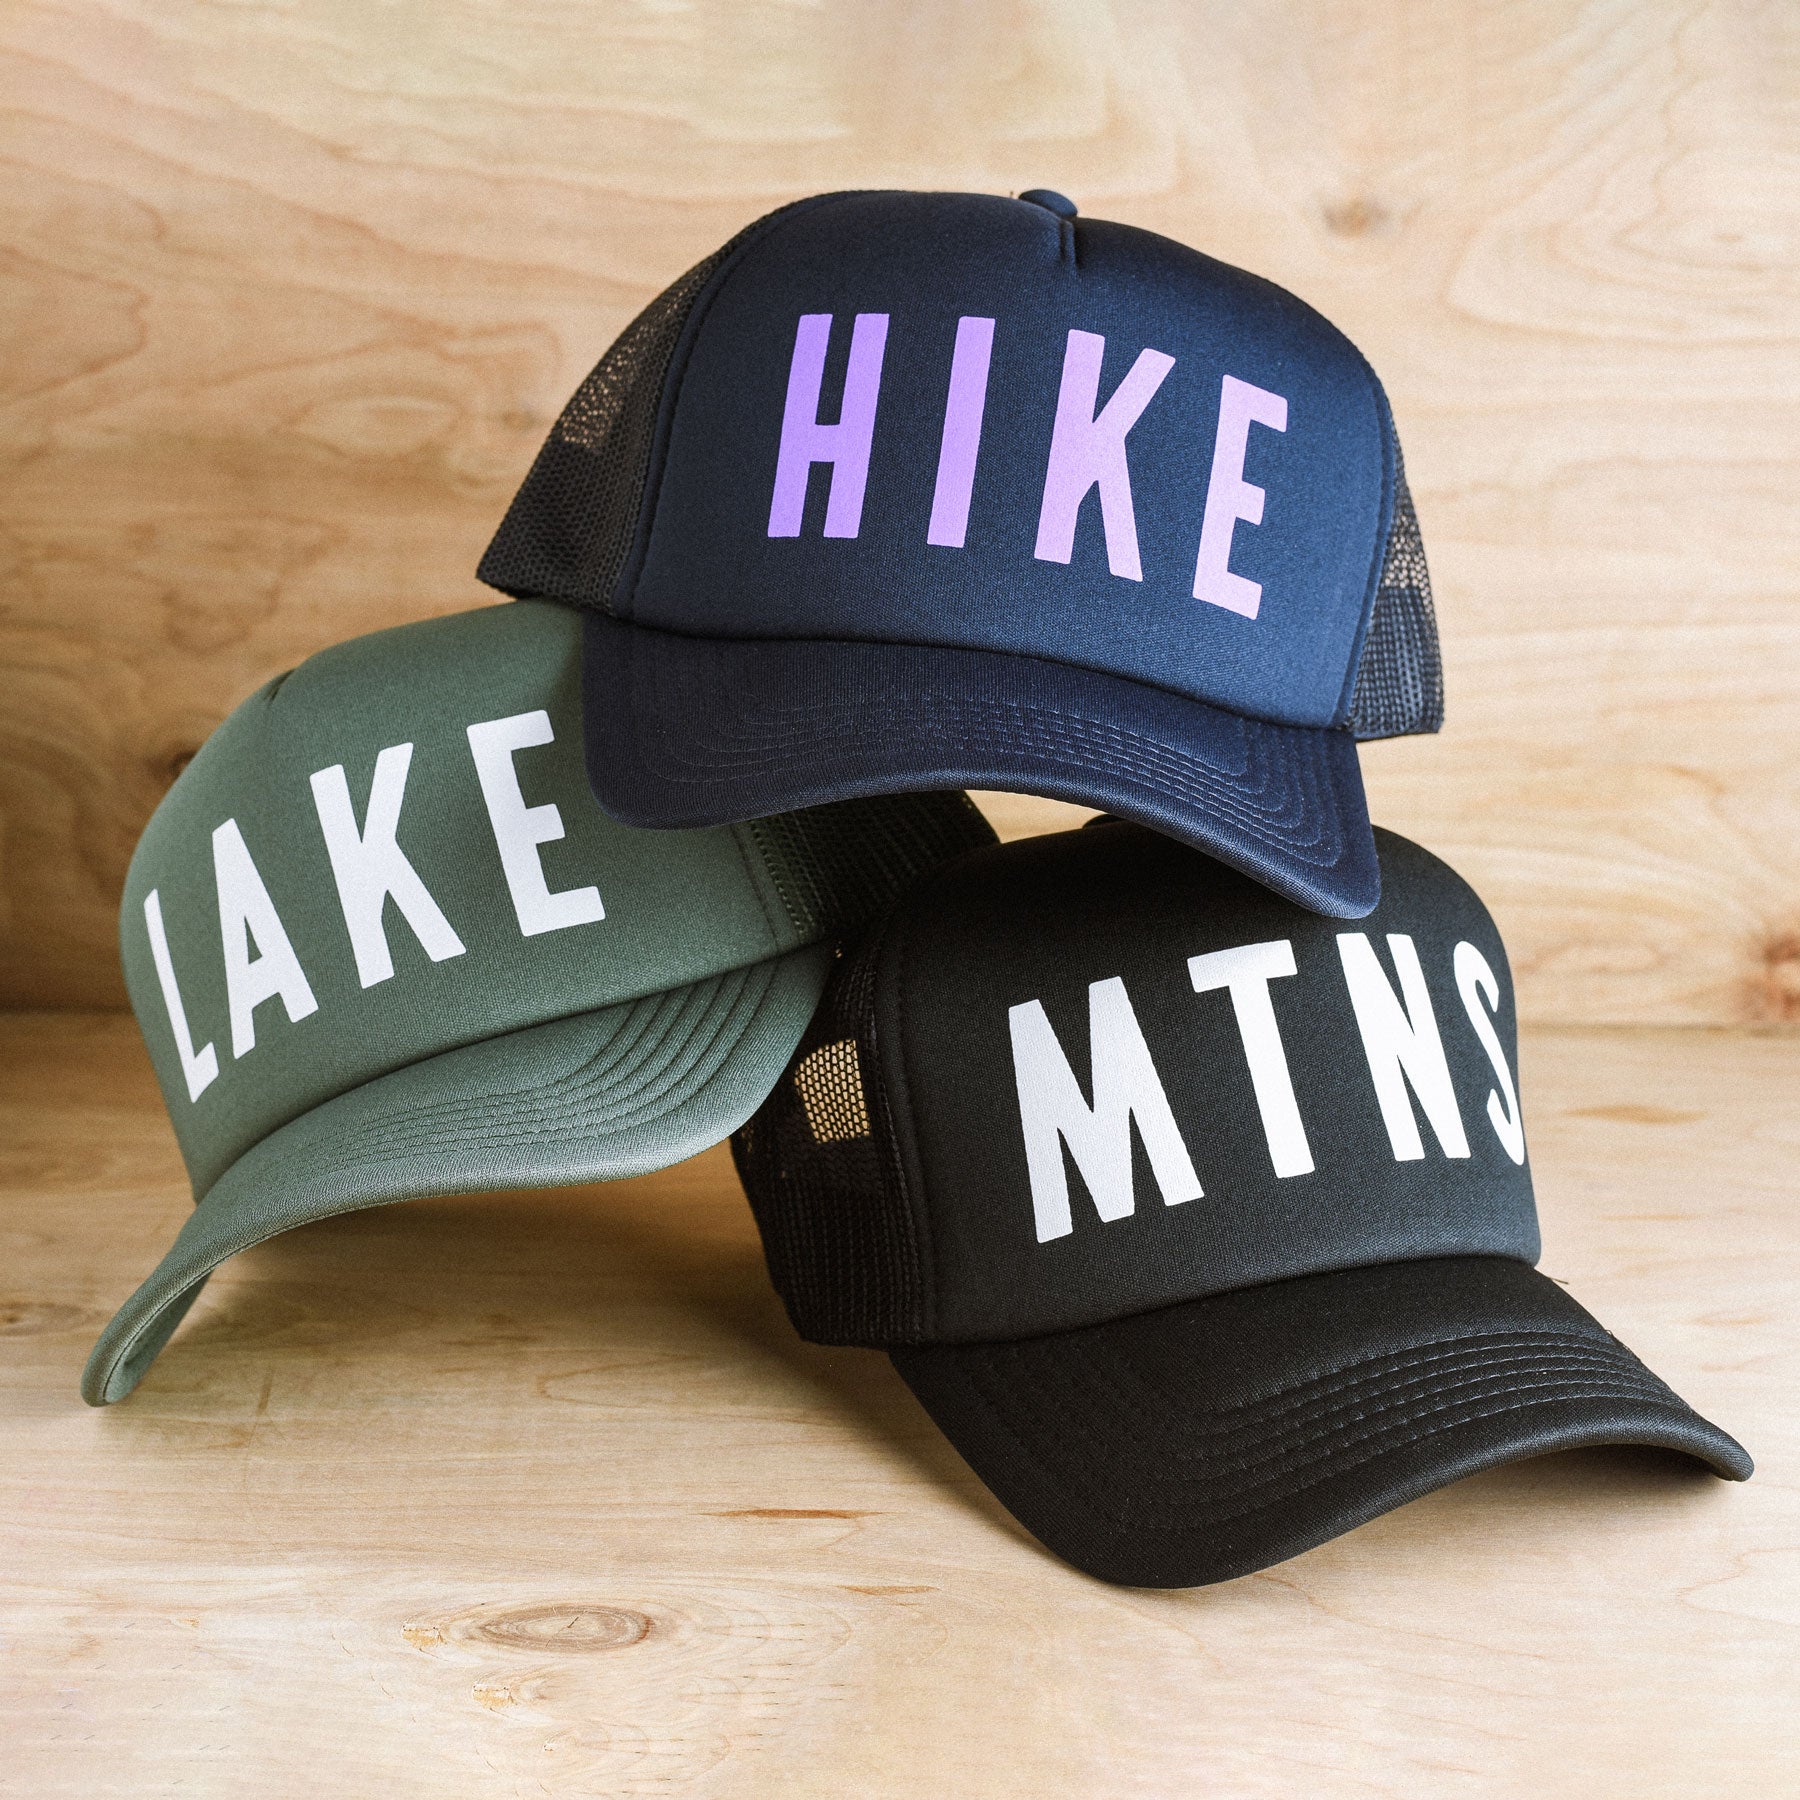 Adventure ready trucker hats by Endless August Supply co